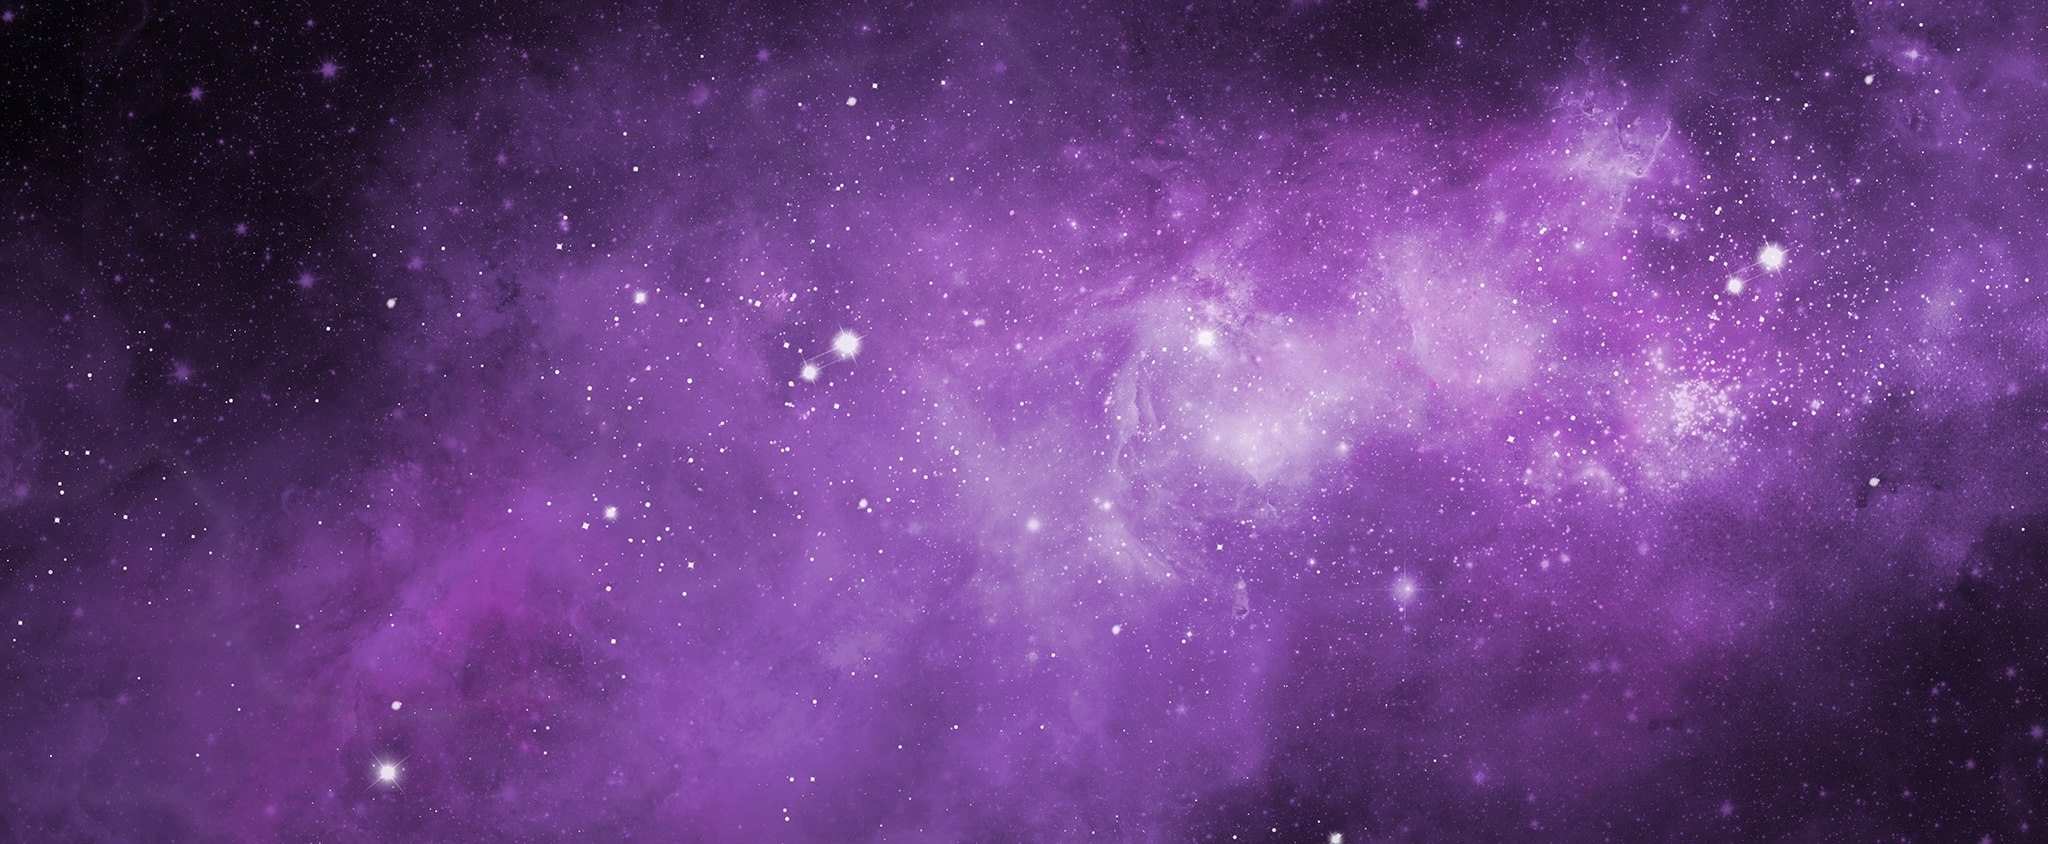 A purple nebula with stars in the background.